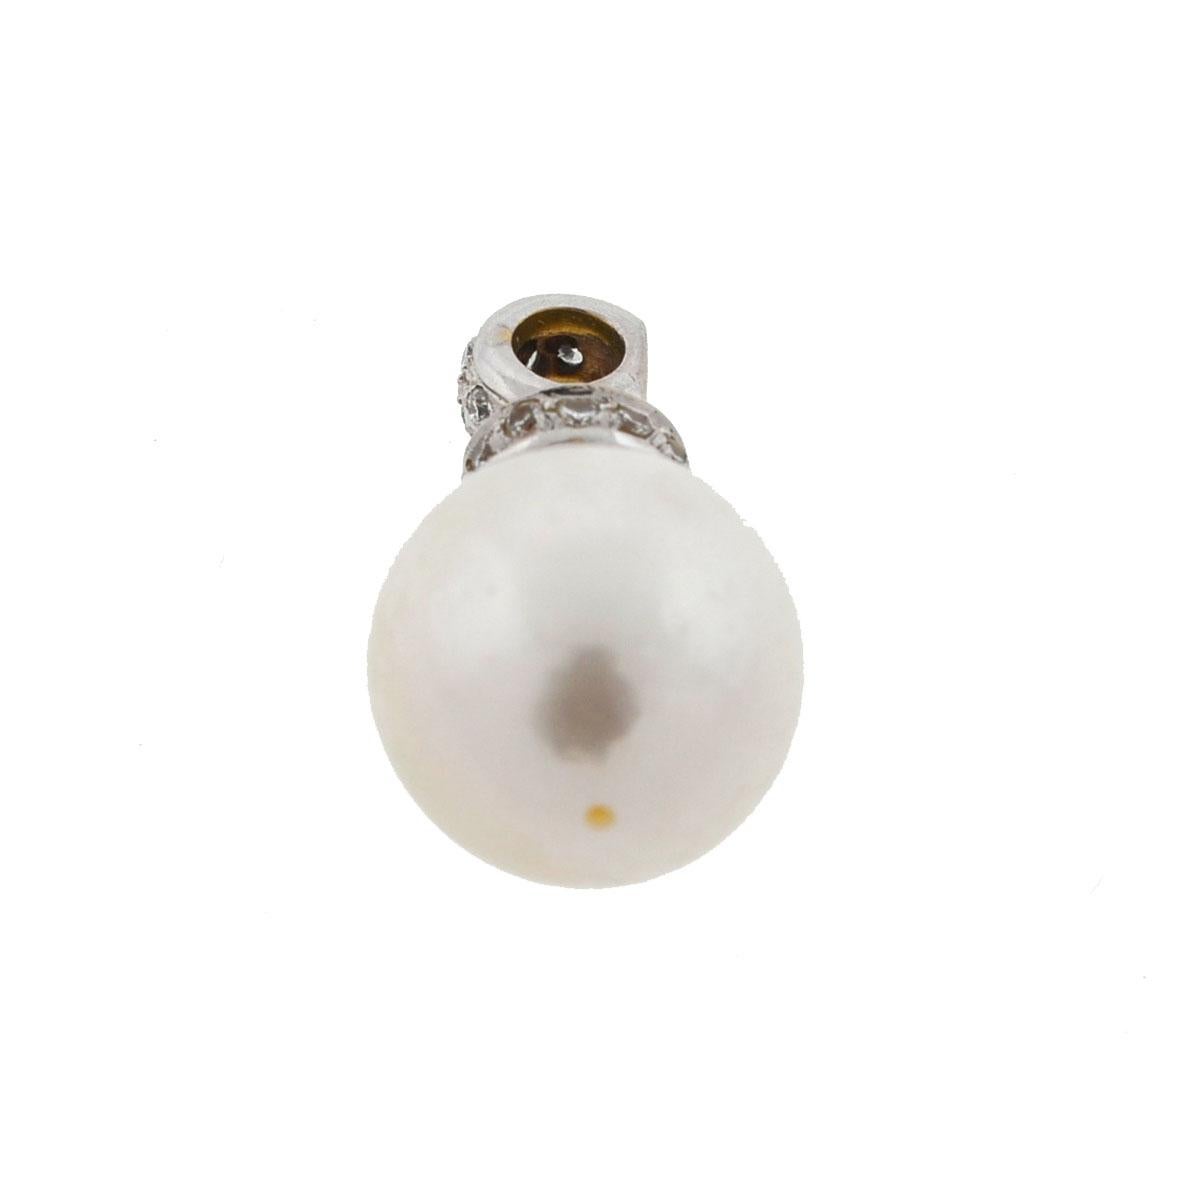 Company-N/A
Model-Diamond Pearl Pendant Approx .22 TCW
Metal -14k white Gold
Size-14mm 
Stones-Pearl/ Diamonds Approx .22 TCW
Includes-Pendant only
Weight-6.05 grams